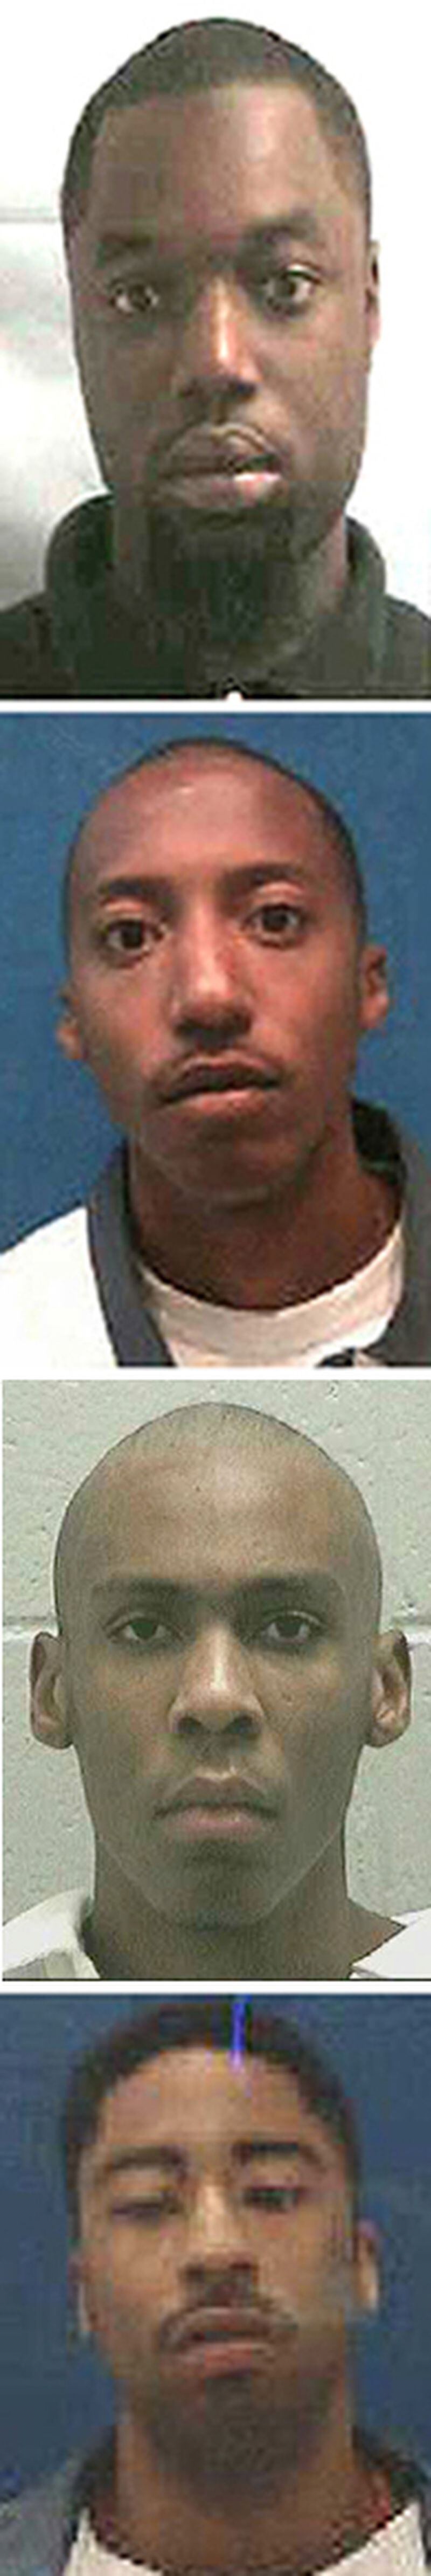 Convicted in the assault on Joshua Martin (top to bottom): Willie Gray Franklin Jr., DeAndre Evans, Brad McGail Johnson and Claude Morey III.